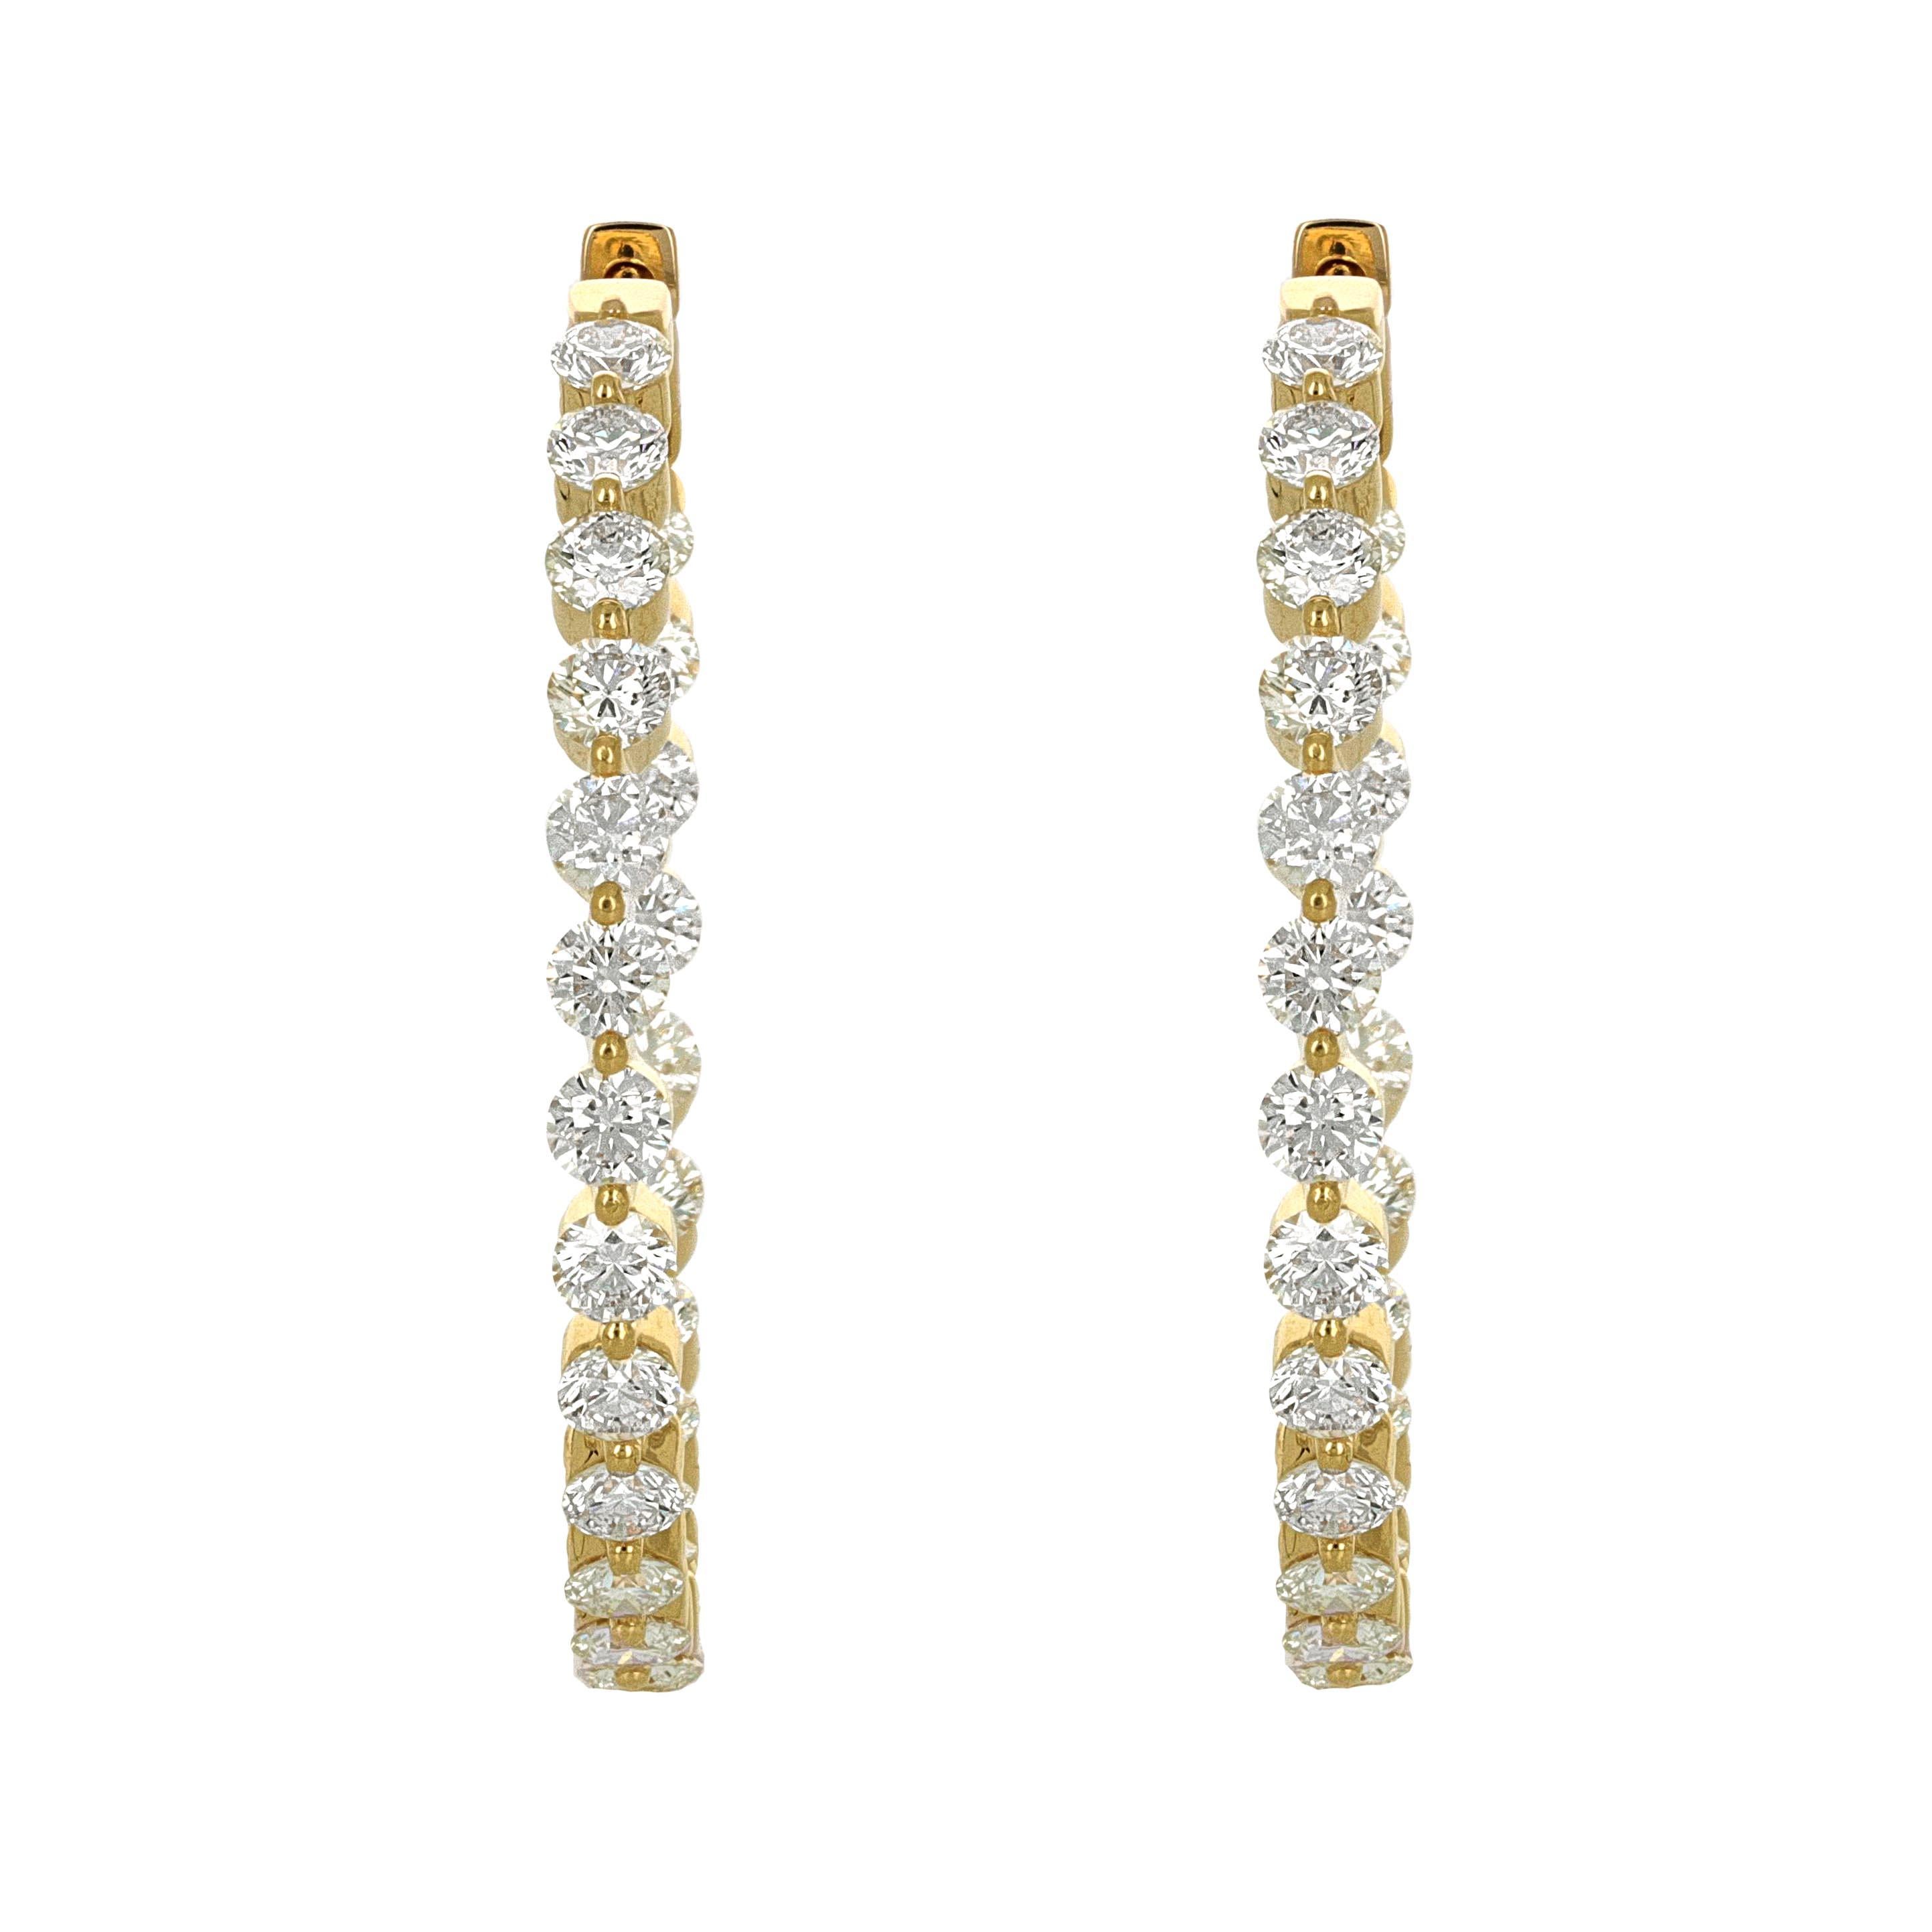 18 karat yellow gold diamond hoop earrings. There are 48 round brilliant diamonds weighing a total carat weight of 6.18 carats. The diamonds are H/I color, VS/SI clarity.

